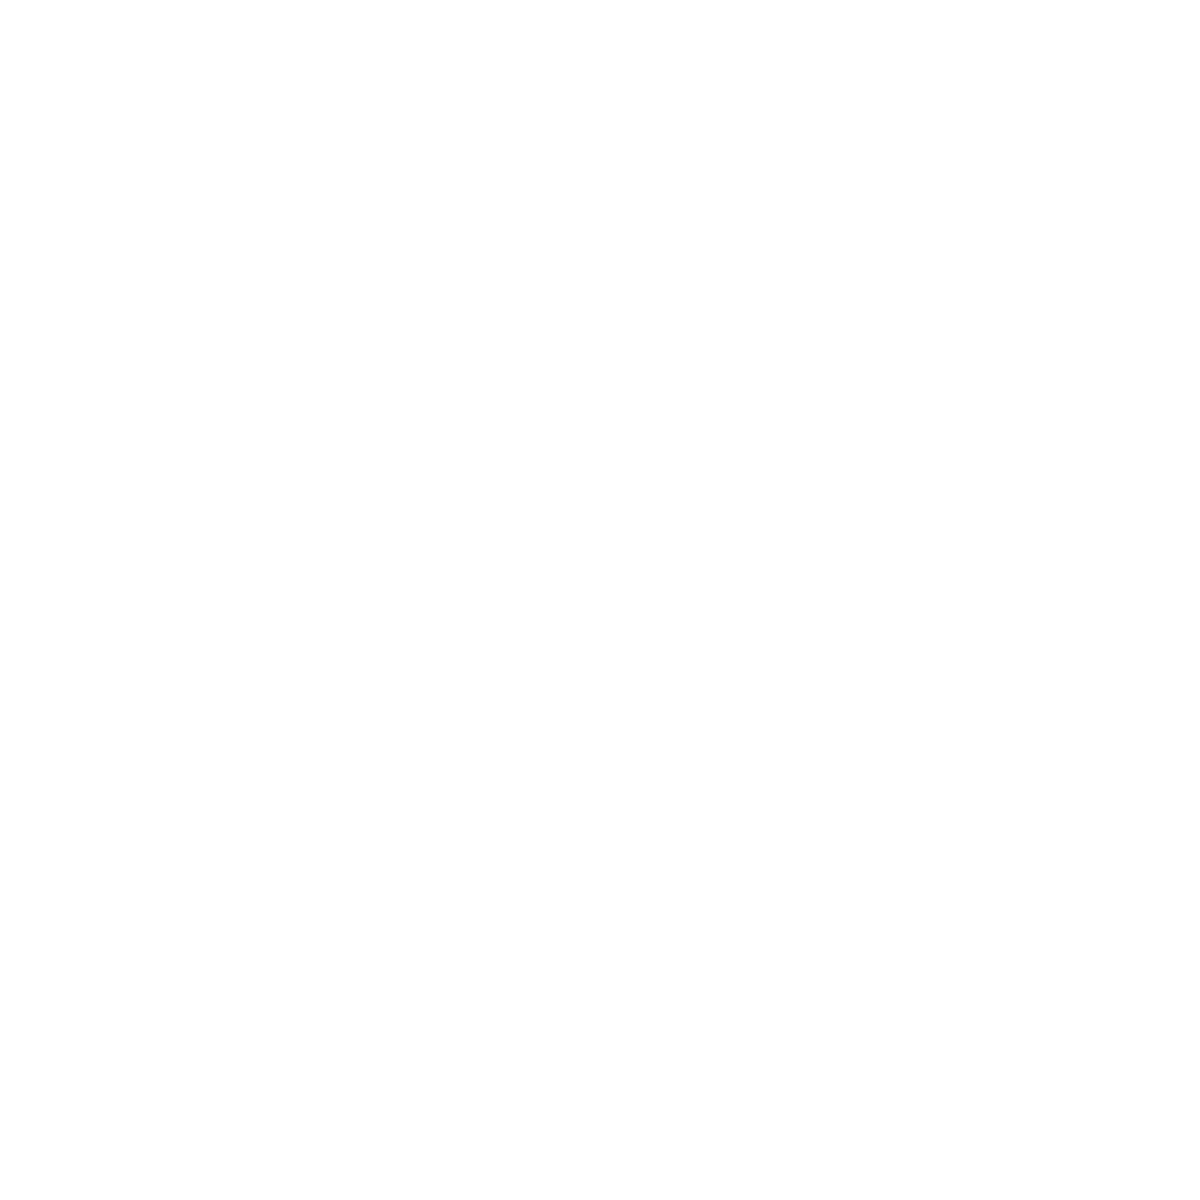 map icon with trees and roads